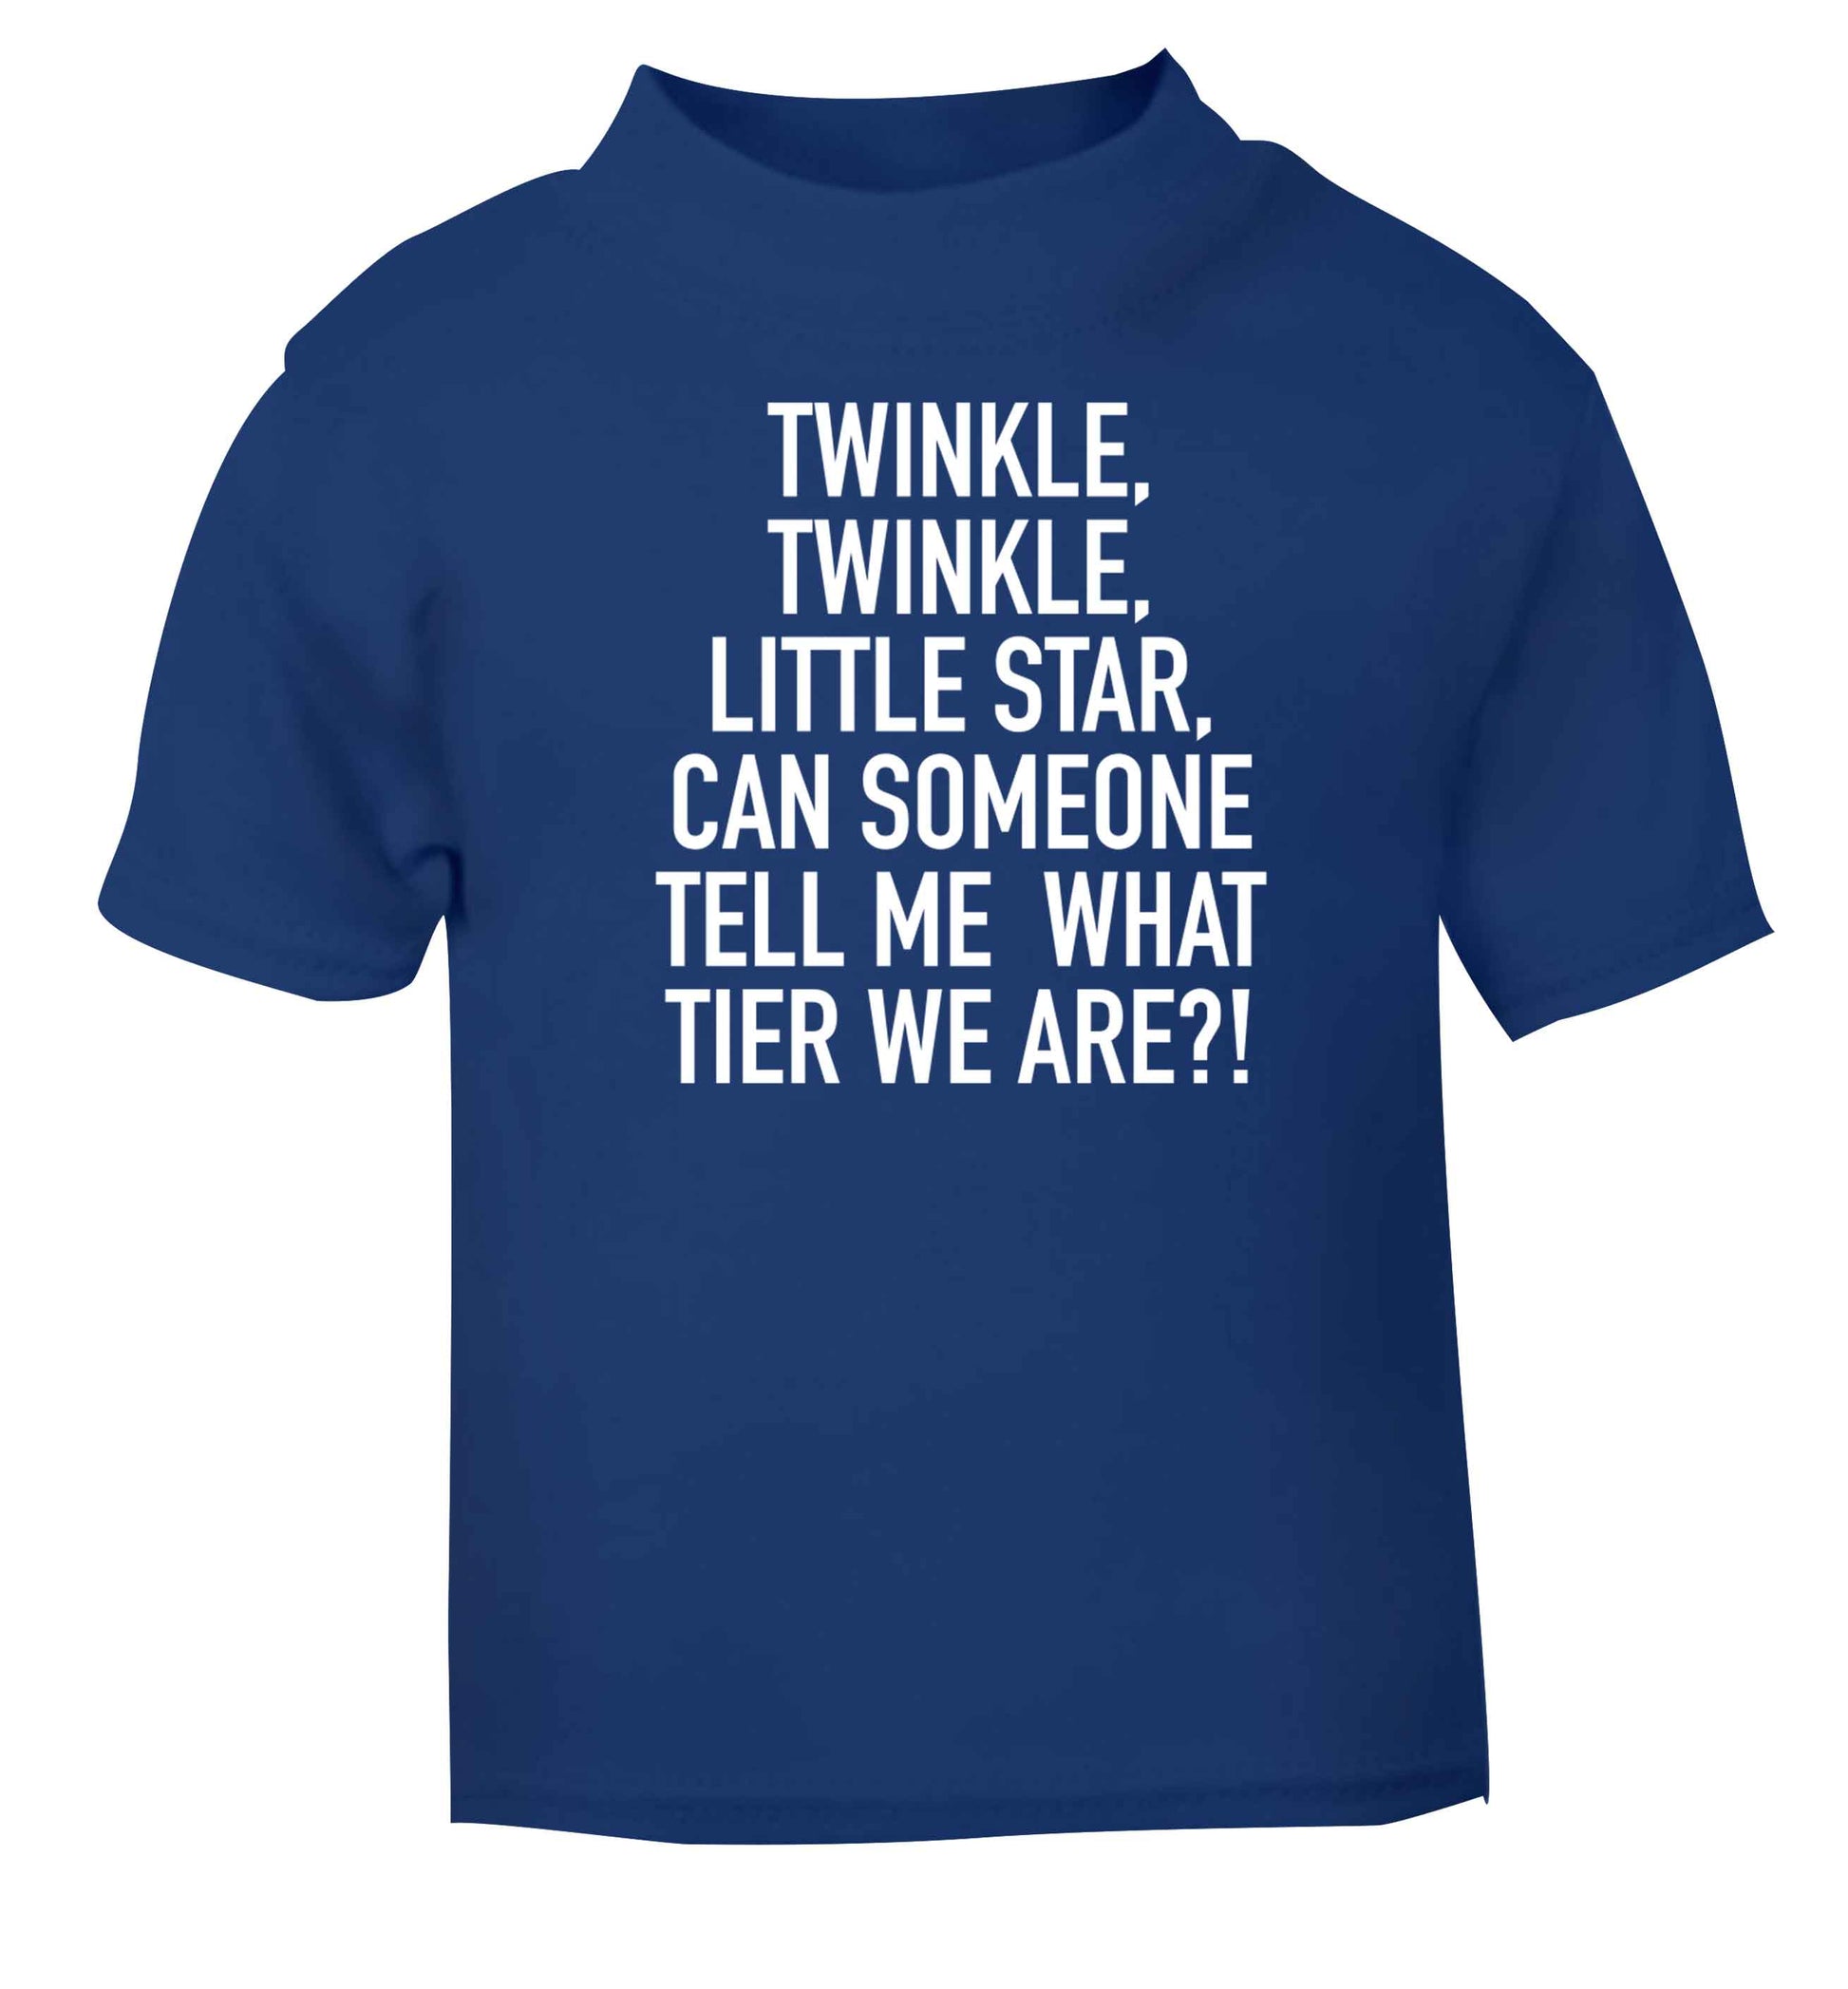 Twinkle twinkle, little star does anyone know what tier we are? blue baby toddler Tshirt 2 Years